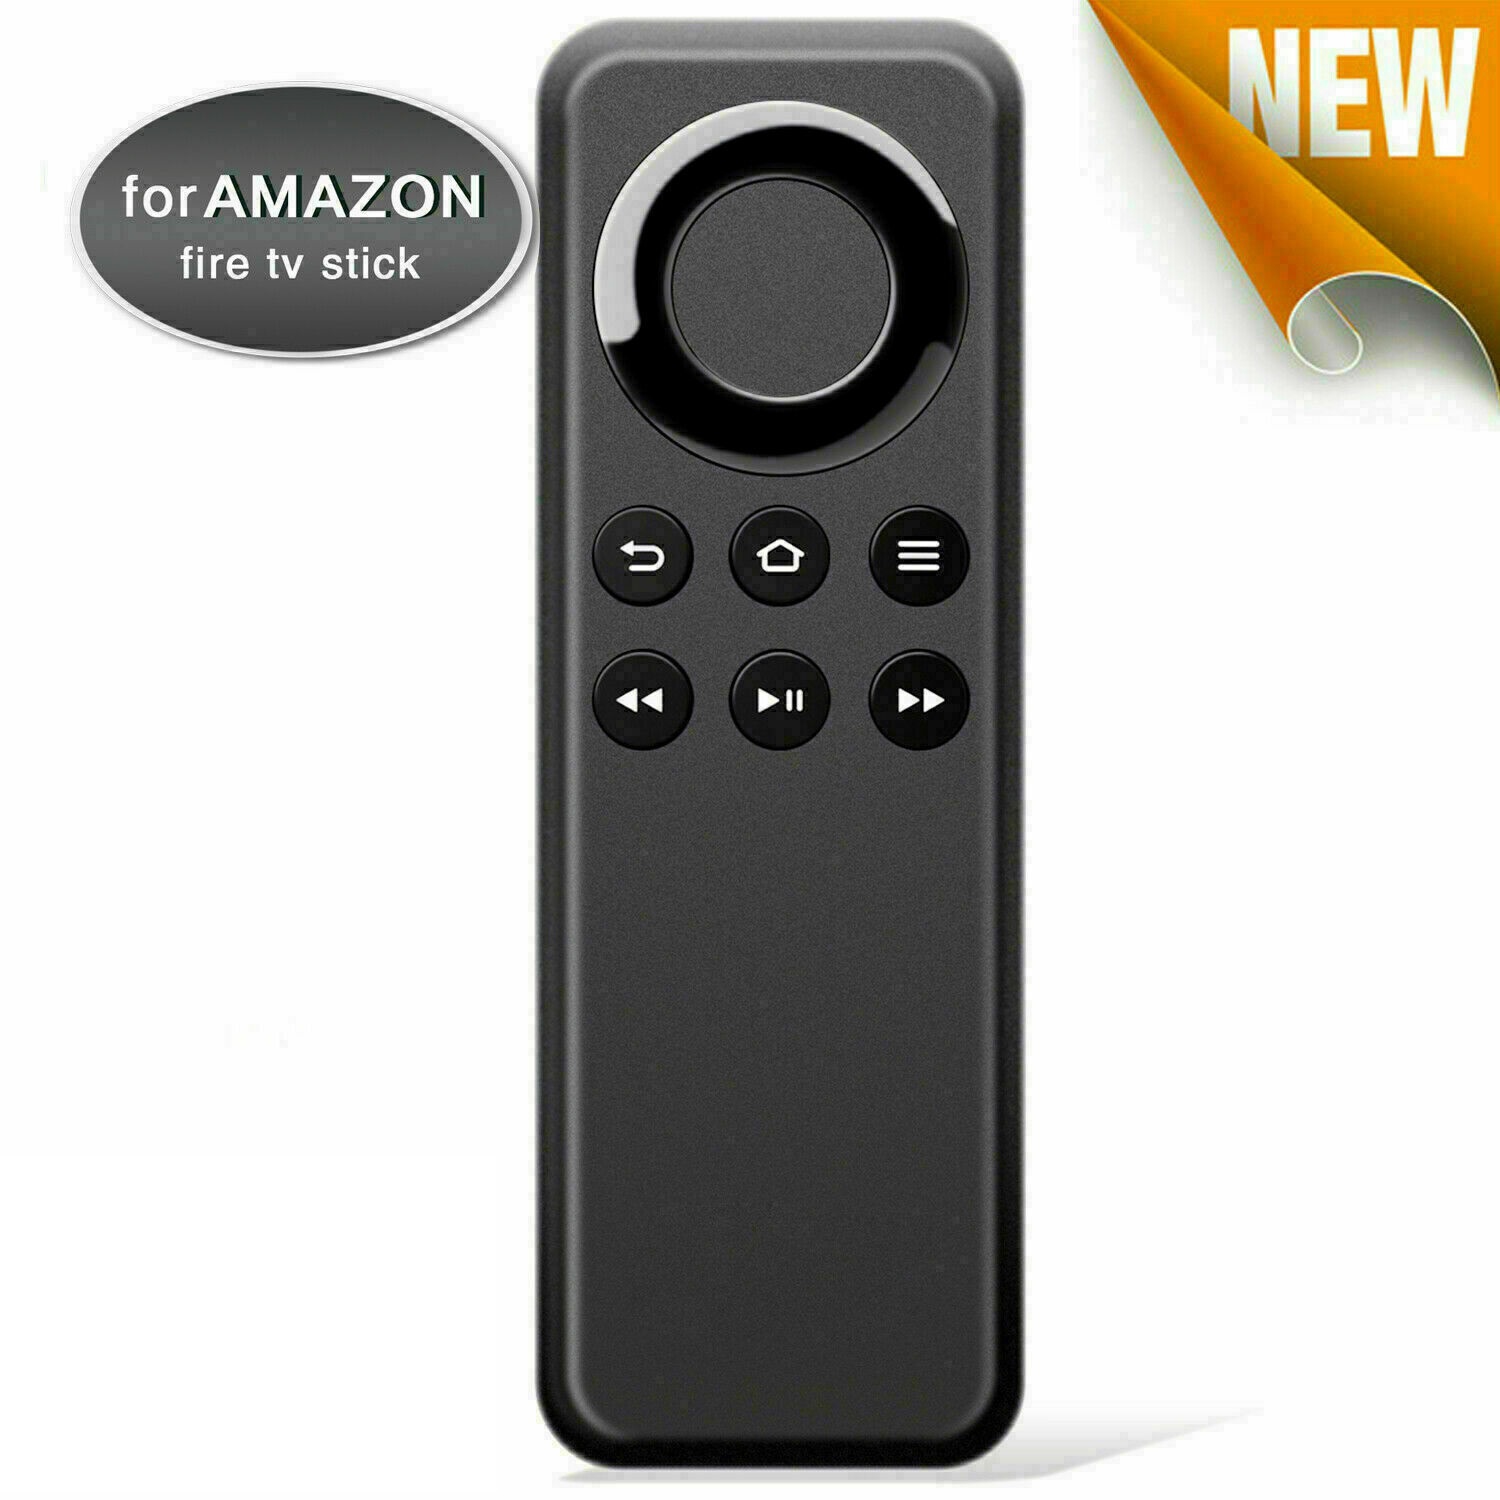 New Replaced Remote Control for Amazon Fire Stick TV Streaming Player Box CV98LM